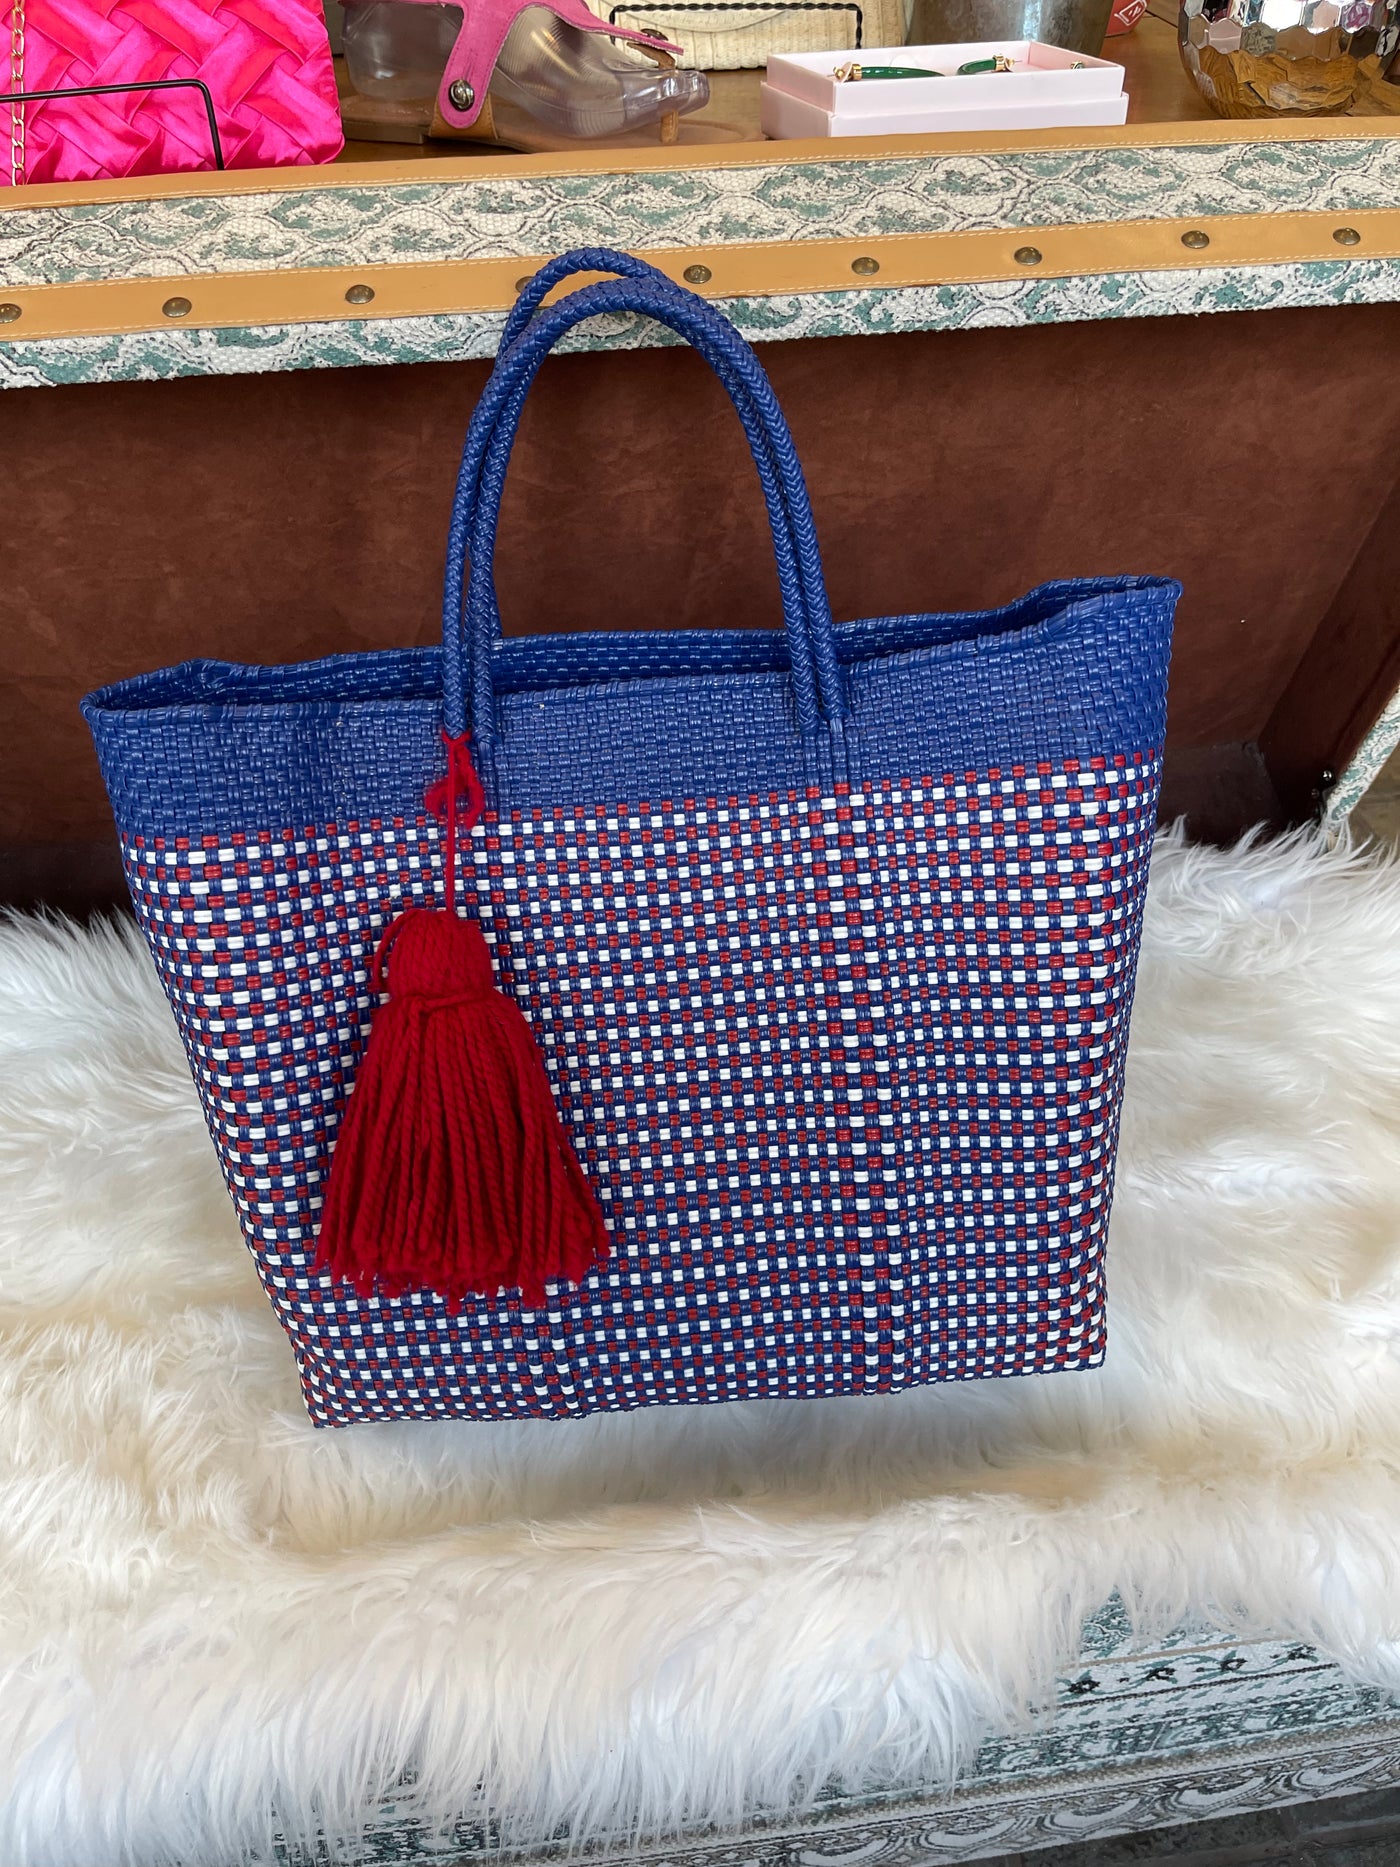 Handmade Recycled Plastic Bags from Mexico